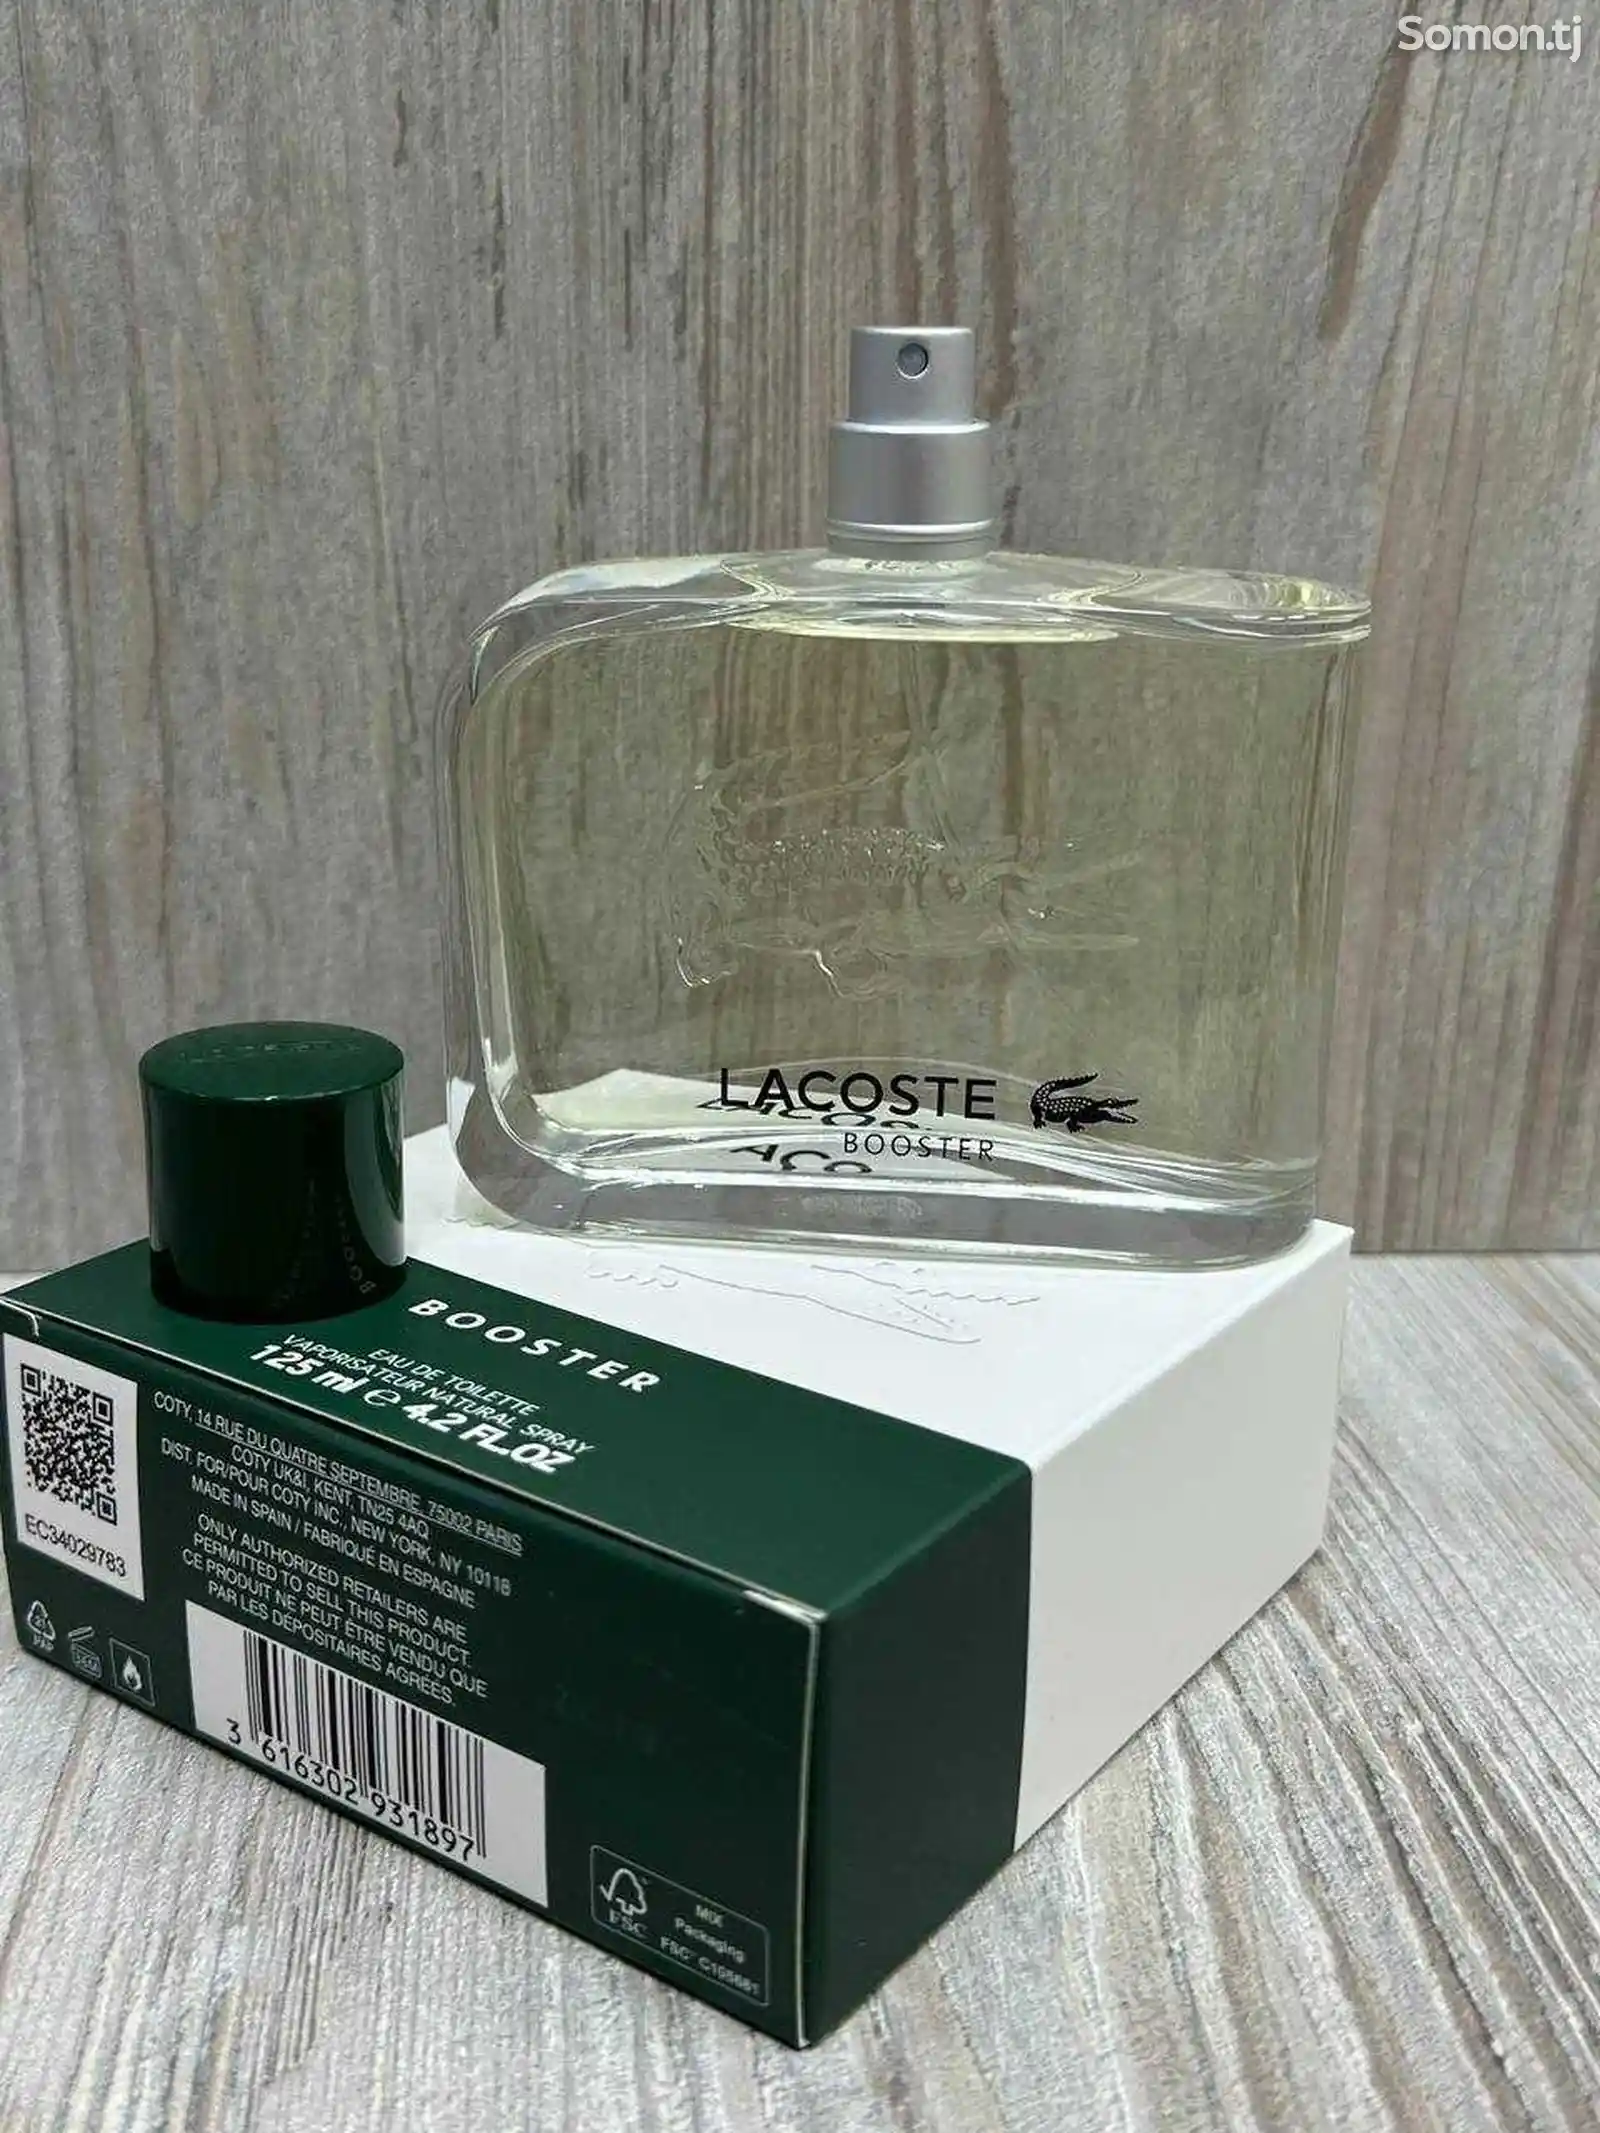 Парфюм Lacoste Booster-1